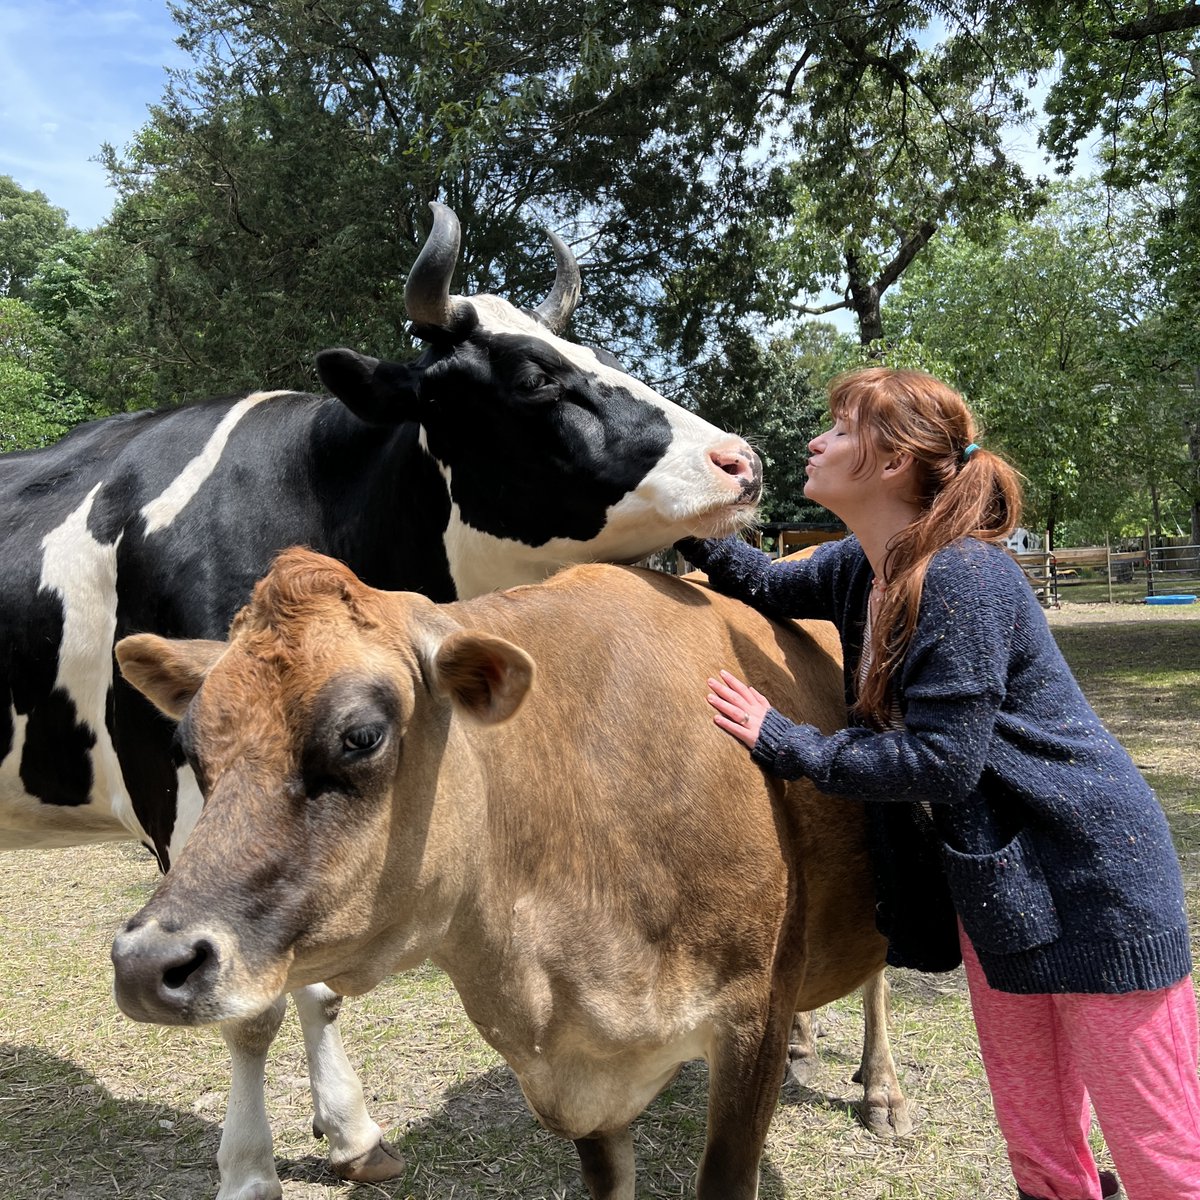 Mallory was trying to sneak a kiss from Jenna. Most people don’t realize just how much like giant puppies cows truly are. They constantly seek out attention, love to be playful, and want to be a part of everything. They really are just giant grass puppies.